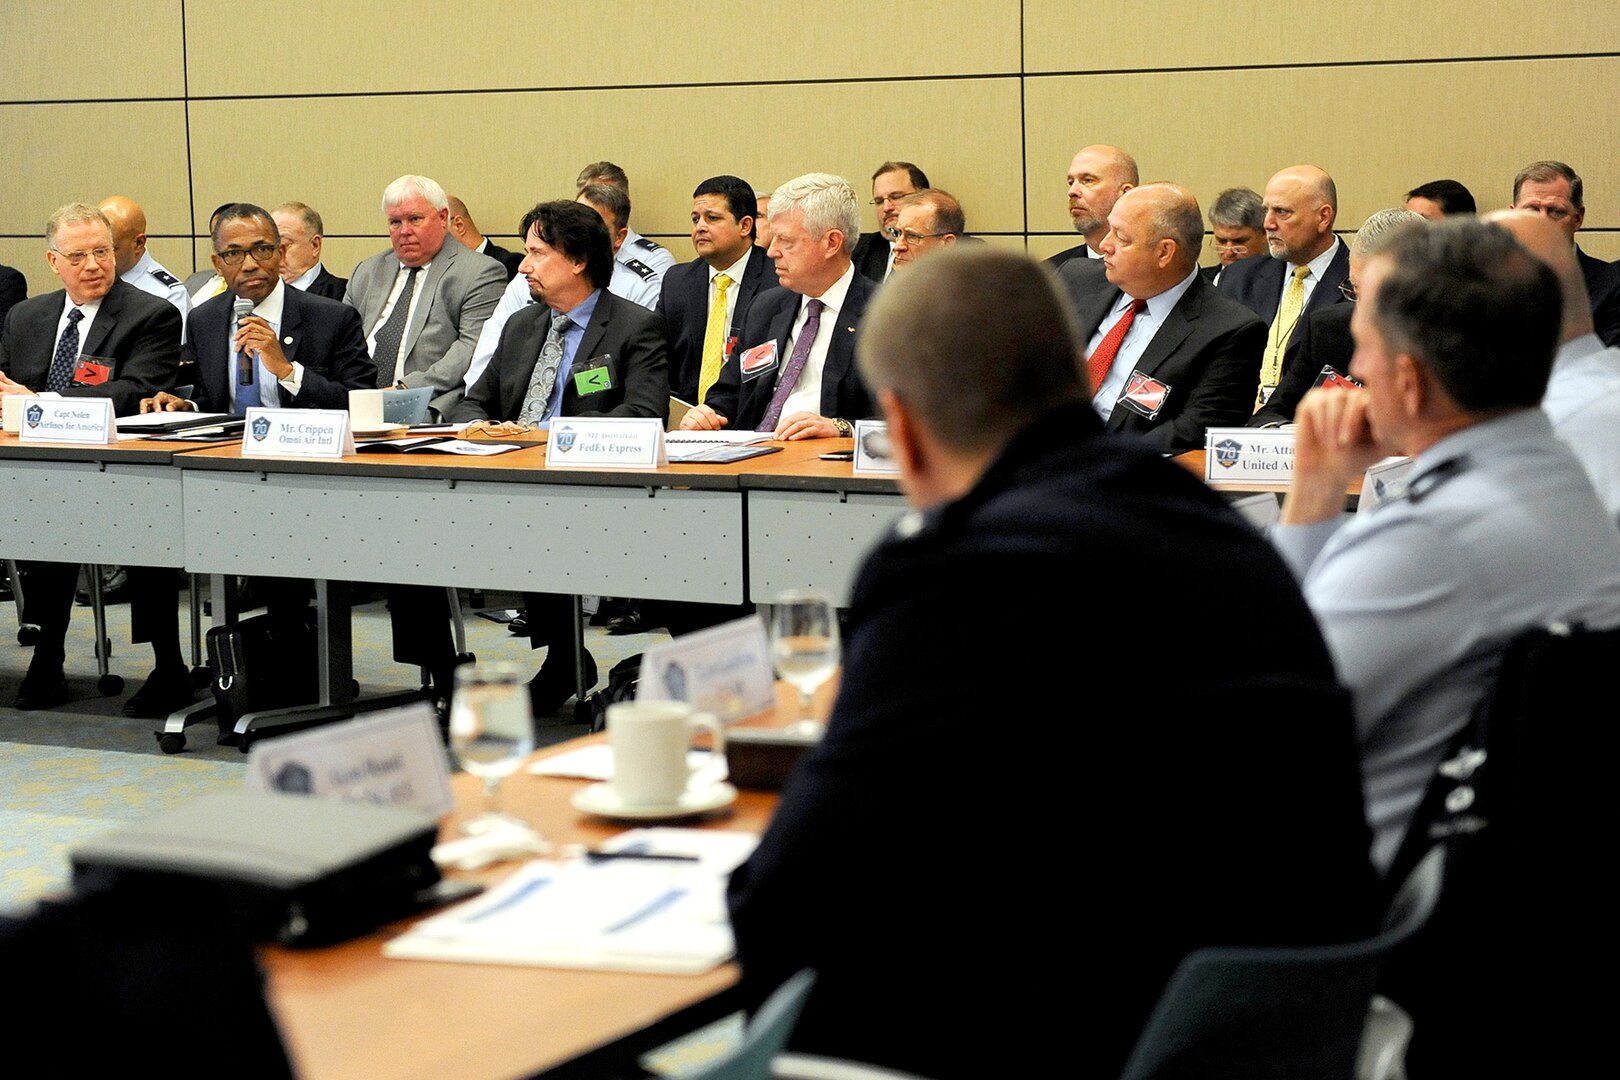 Air Force Chief of Staff Gen. David L. Goldfein discusses the national pilot sourcing with airline executives at the National Pilot Sourcing Meeting in Alexandria, Va., May 18, 2017. The meeting was held to discuss opportunities to improve collaboration between airlines and the military to ensure high-quality pilots for the need of the nation. (U.S. Air Force photo/Staff Sgt. Jannelle McRae)